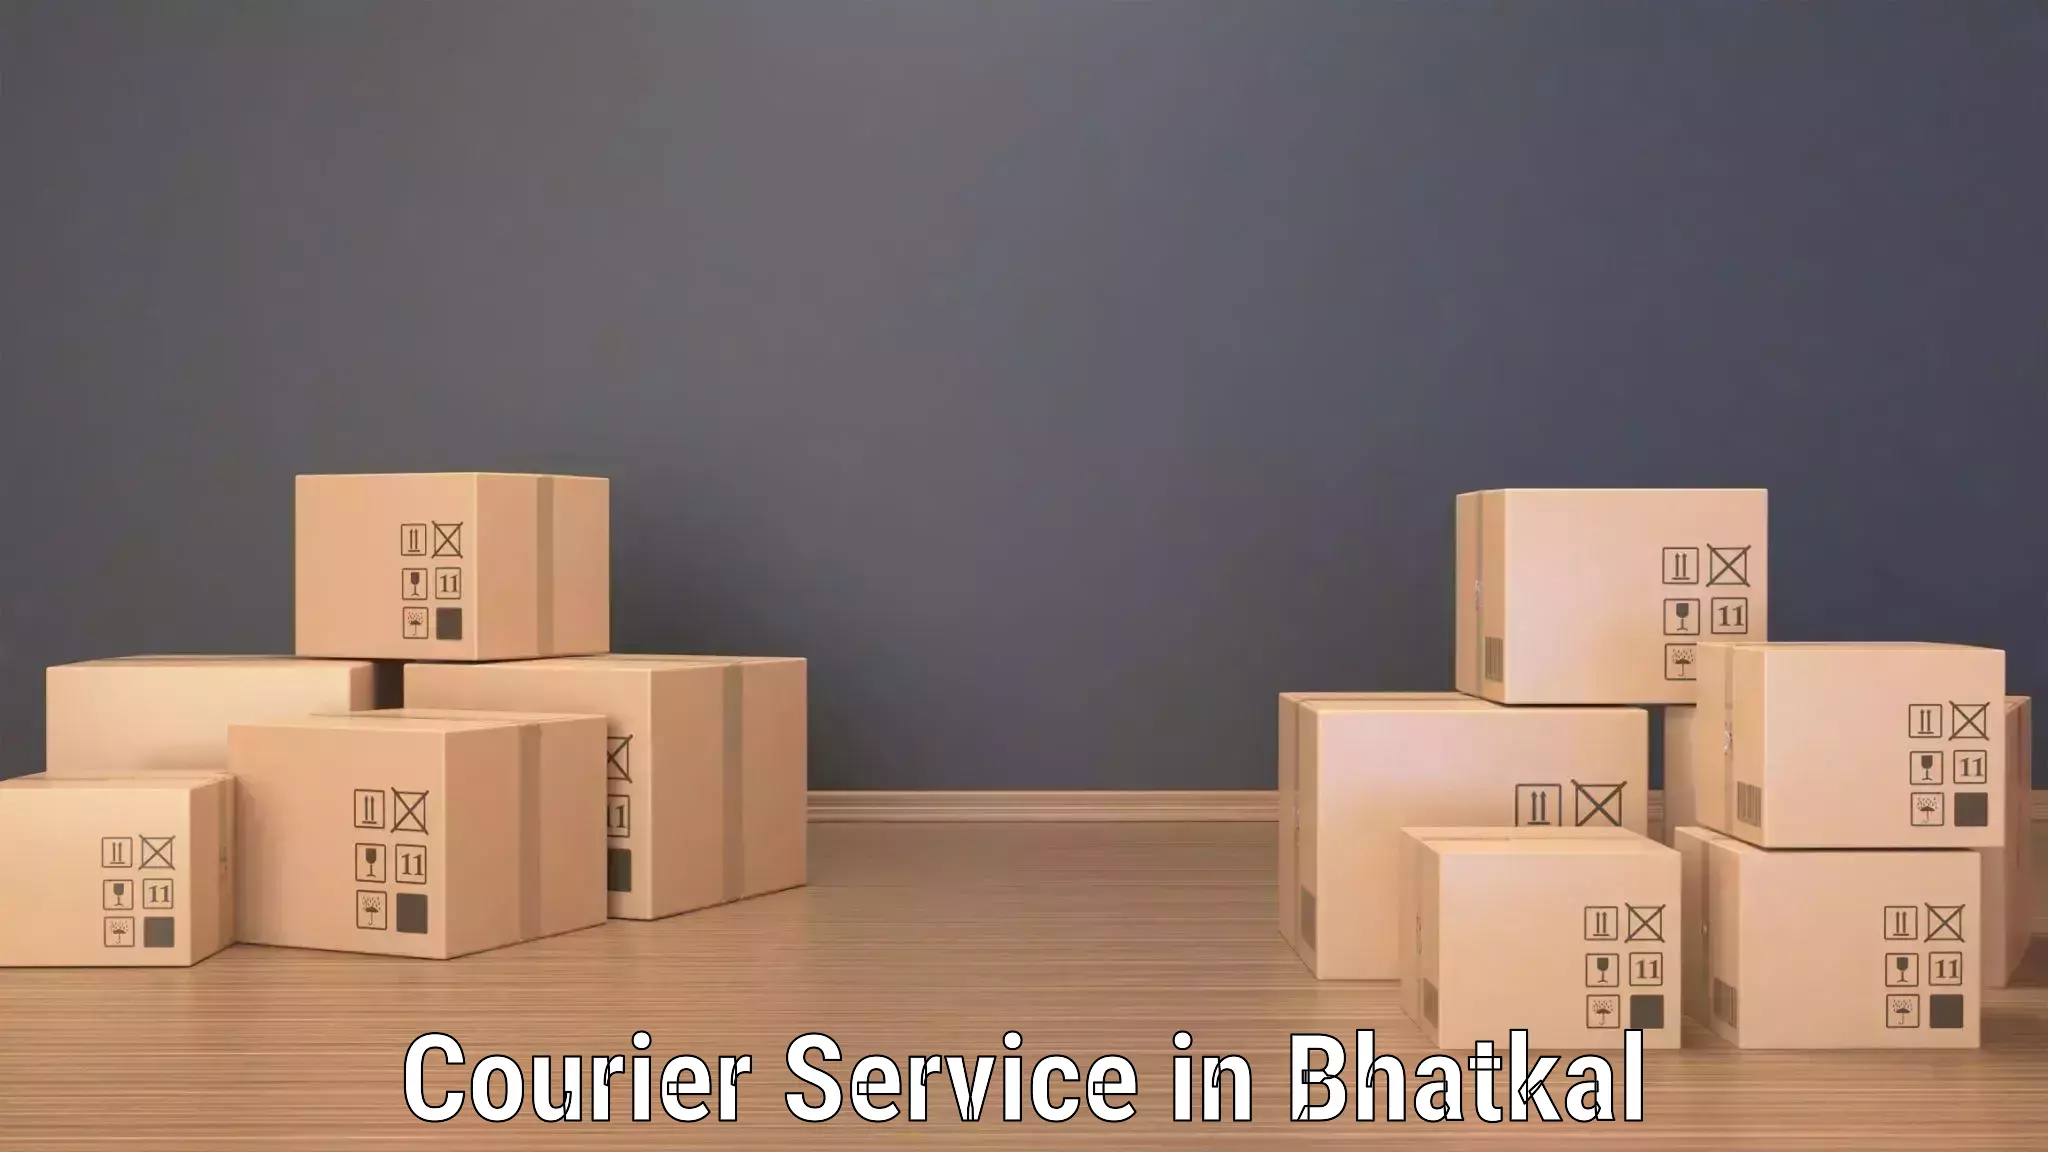 Streamlined delivery processes in Bhatkal